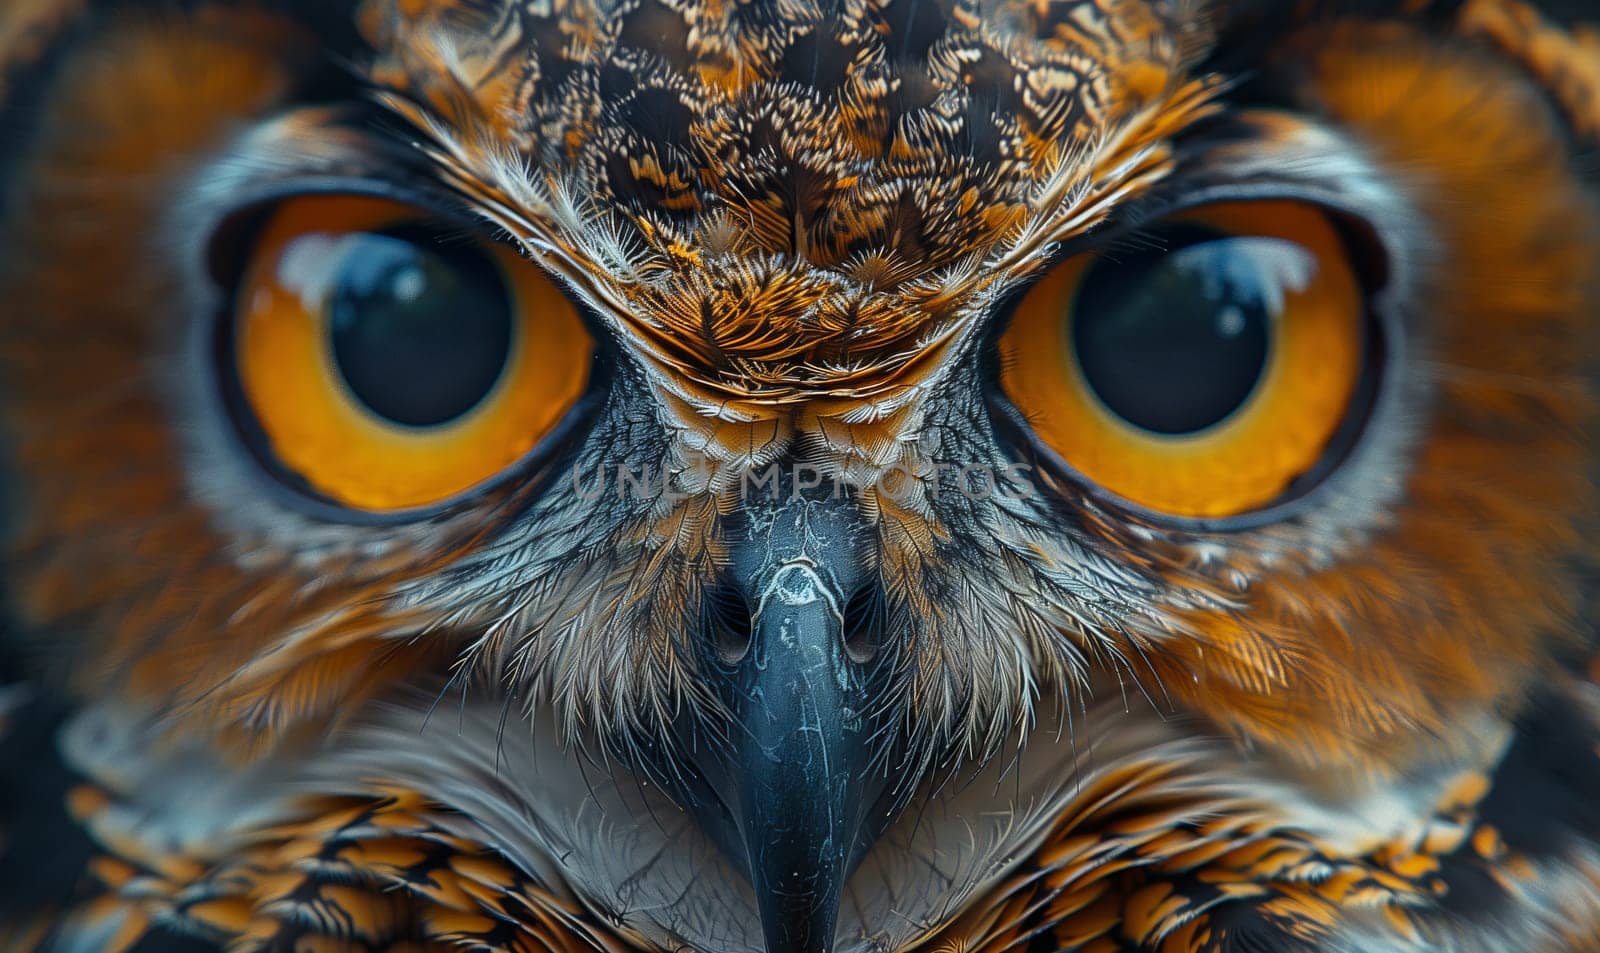 A close up of a Birds face with large yellow eyes, Natures stunning adaptation in the form of an Owl. Its Vertebrate organism features include a sharp beak, feathered coat, and captivating iris